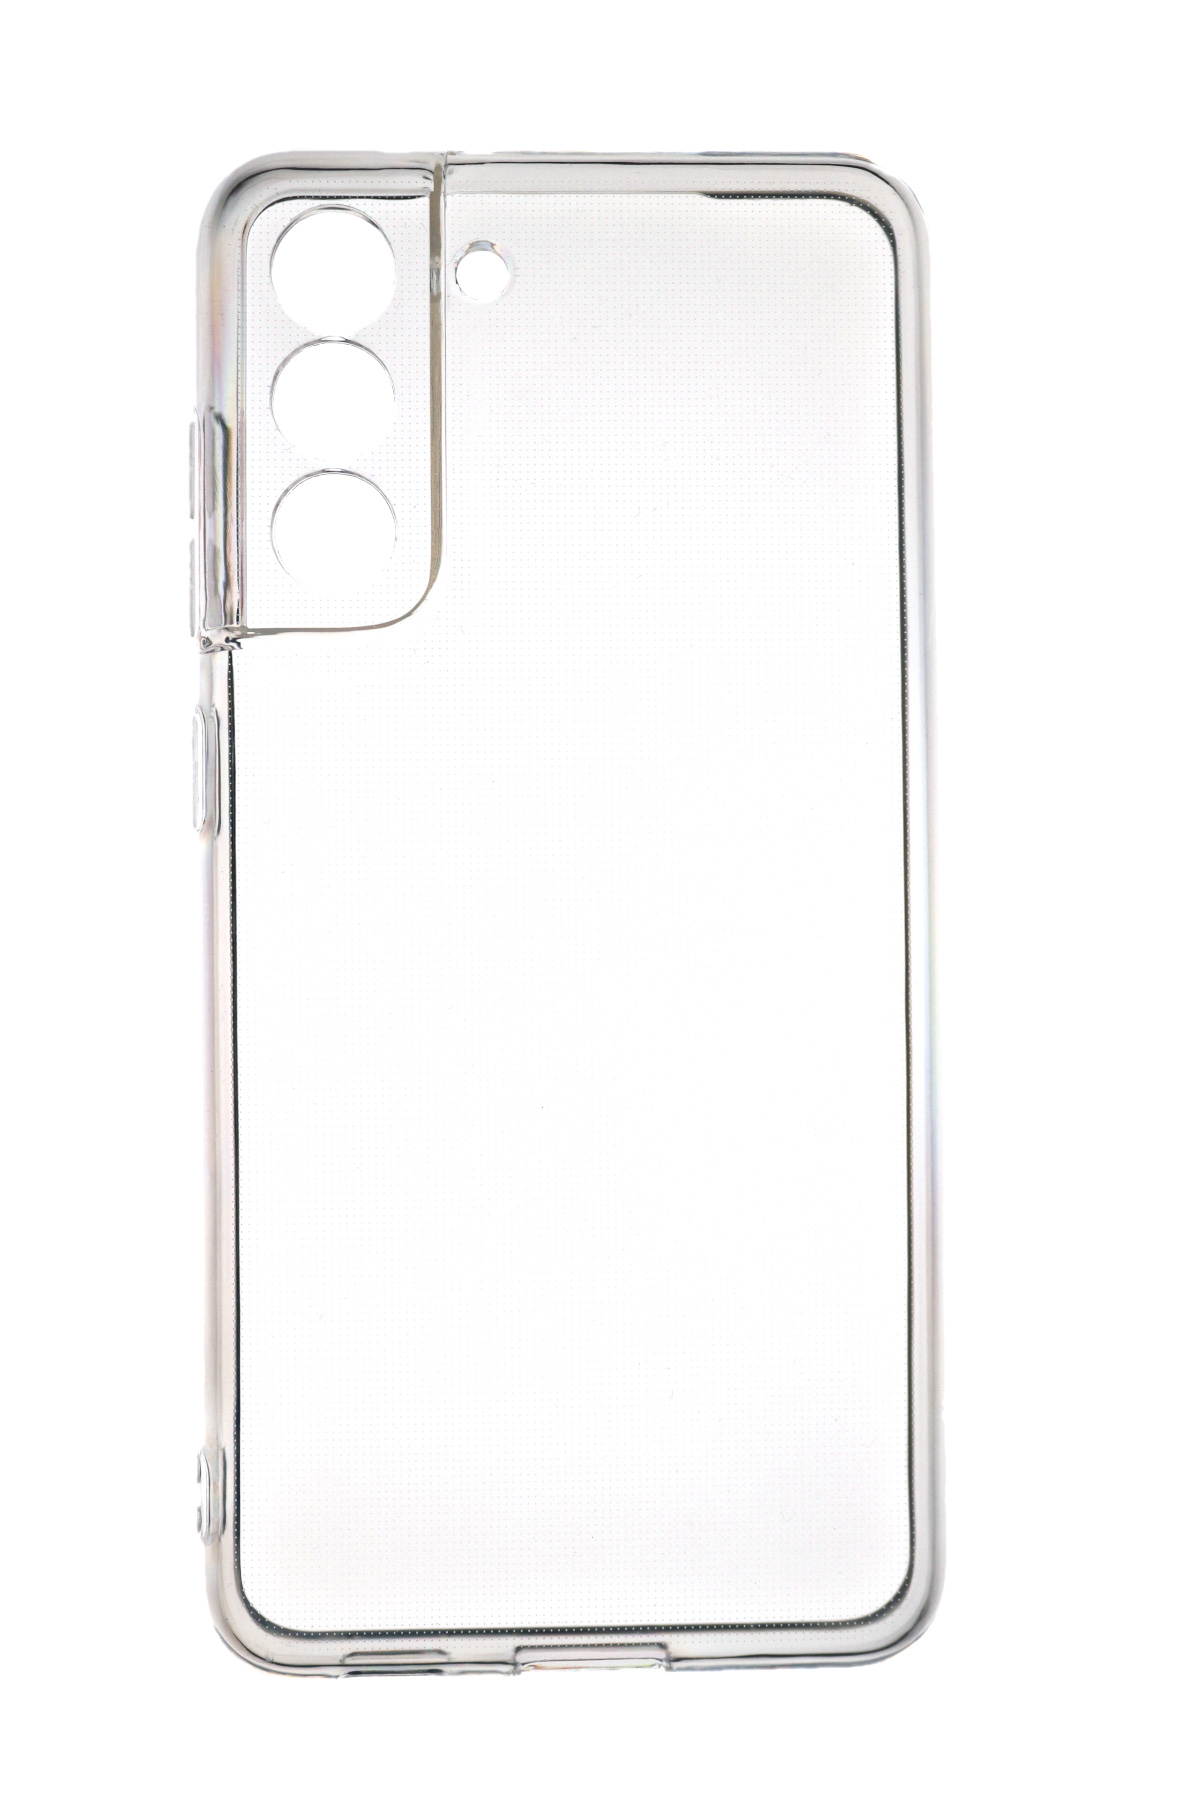 S21 JAMCOVER Samsung, Strong, mm Case Backcover, Transparent 2.0 Galaxy TPU FE,